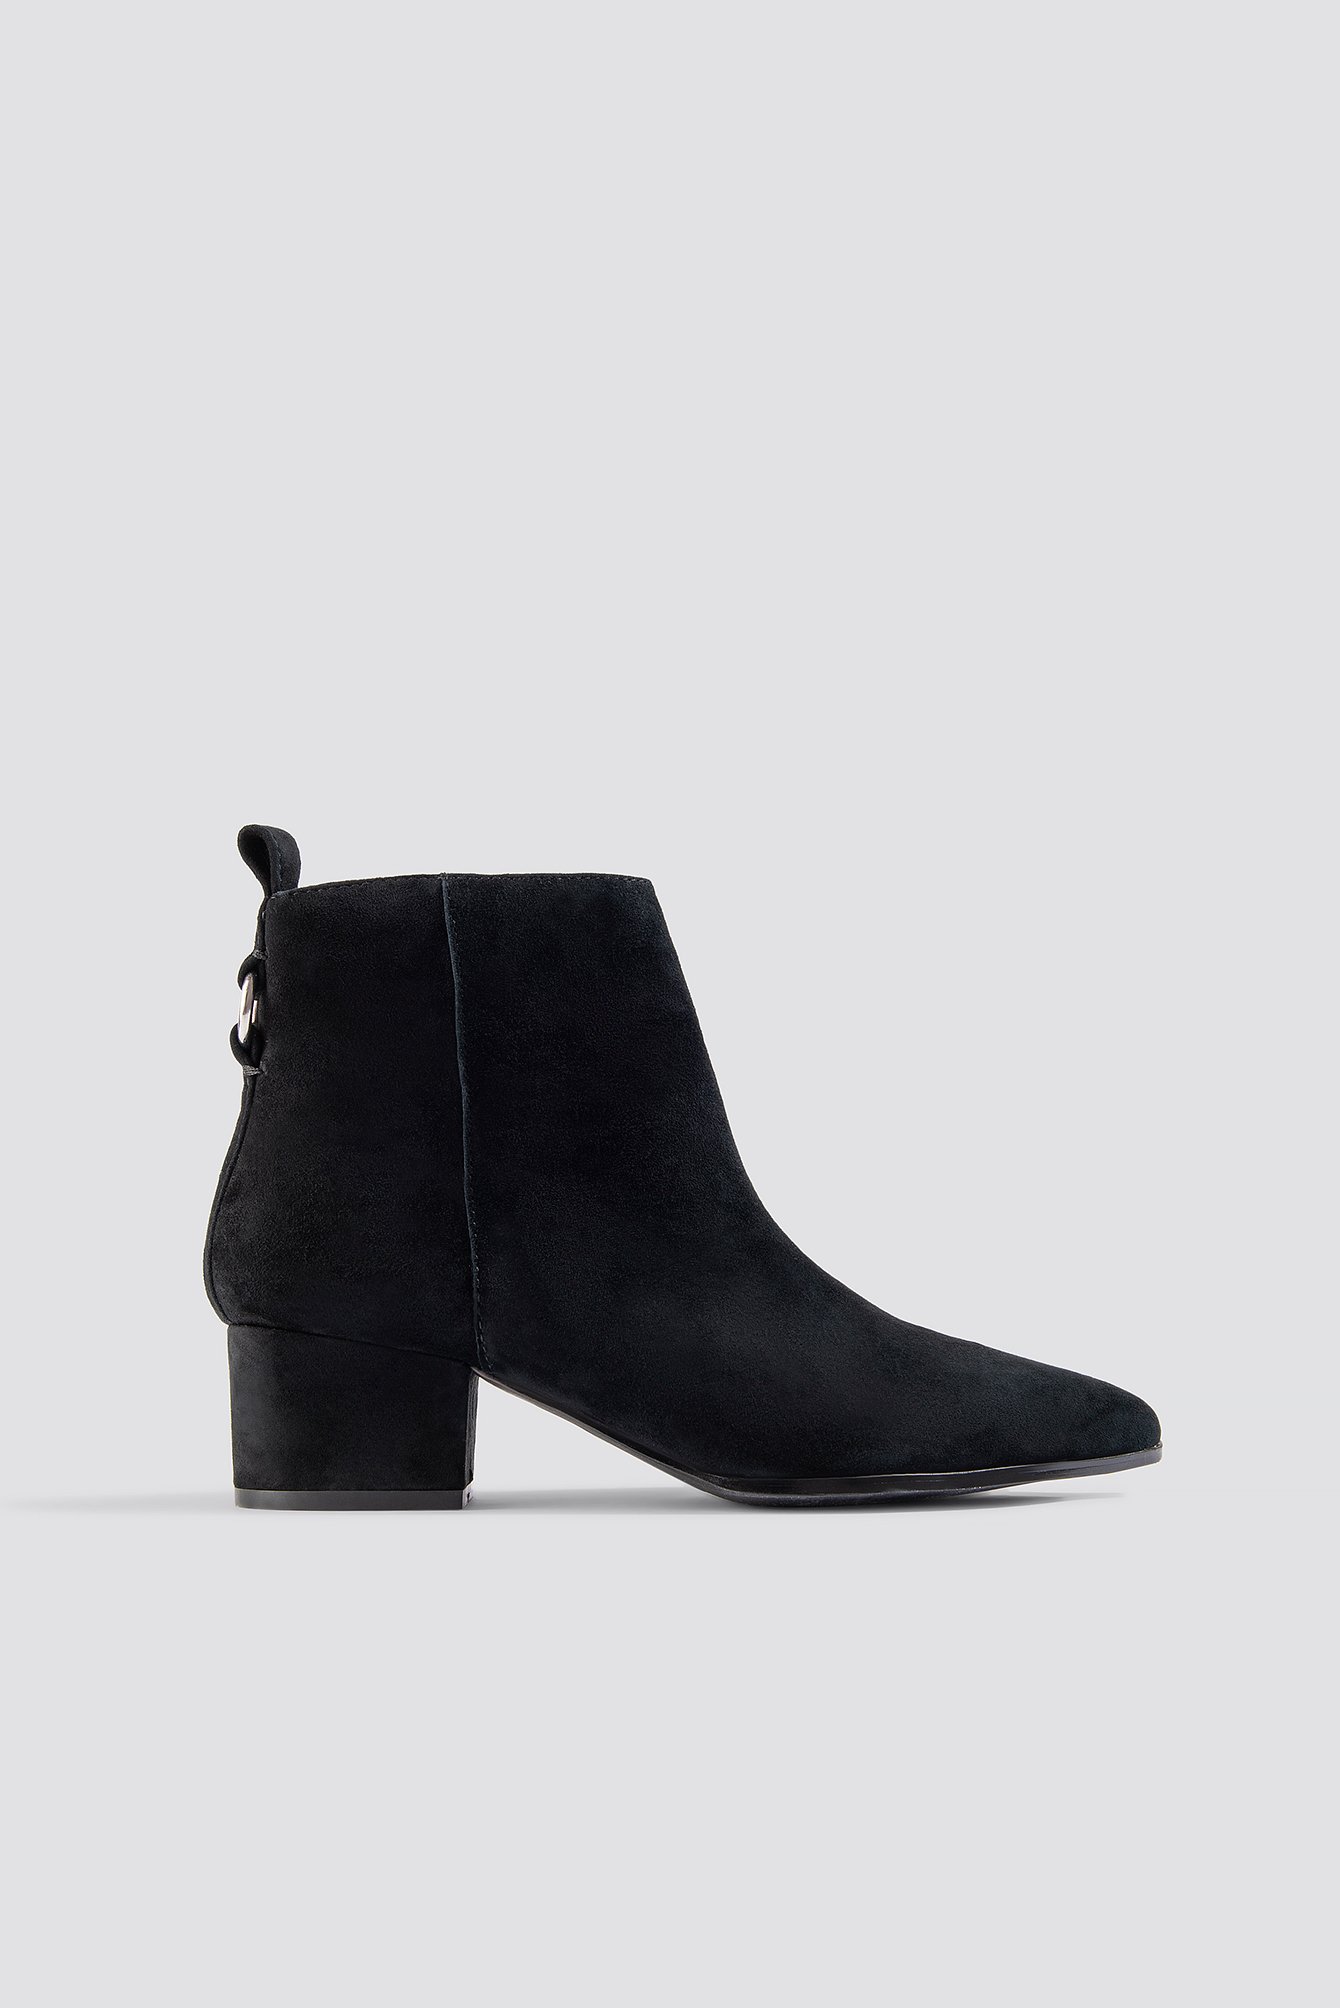 The Clover Ankleboot by Steve Madden features a soft, suede material, a block heel and a pointy toe, a side zipper closure, and a buckle detail in the back.